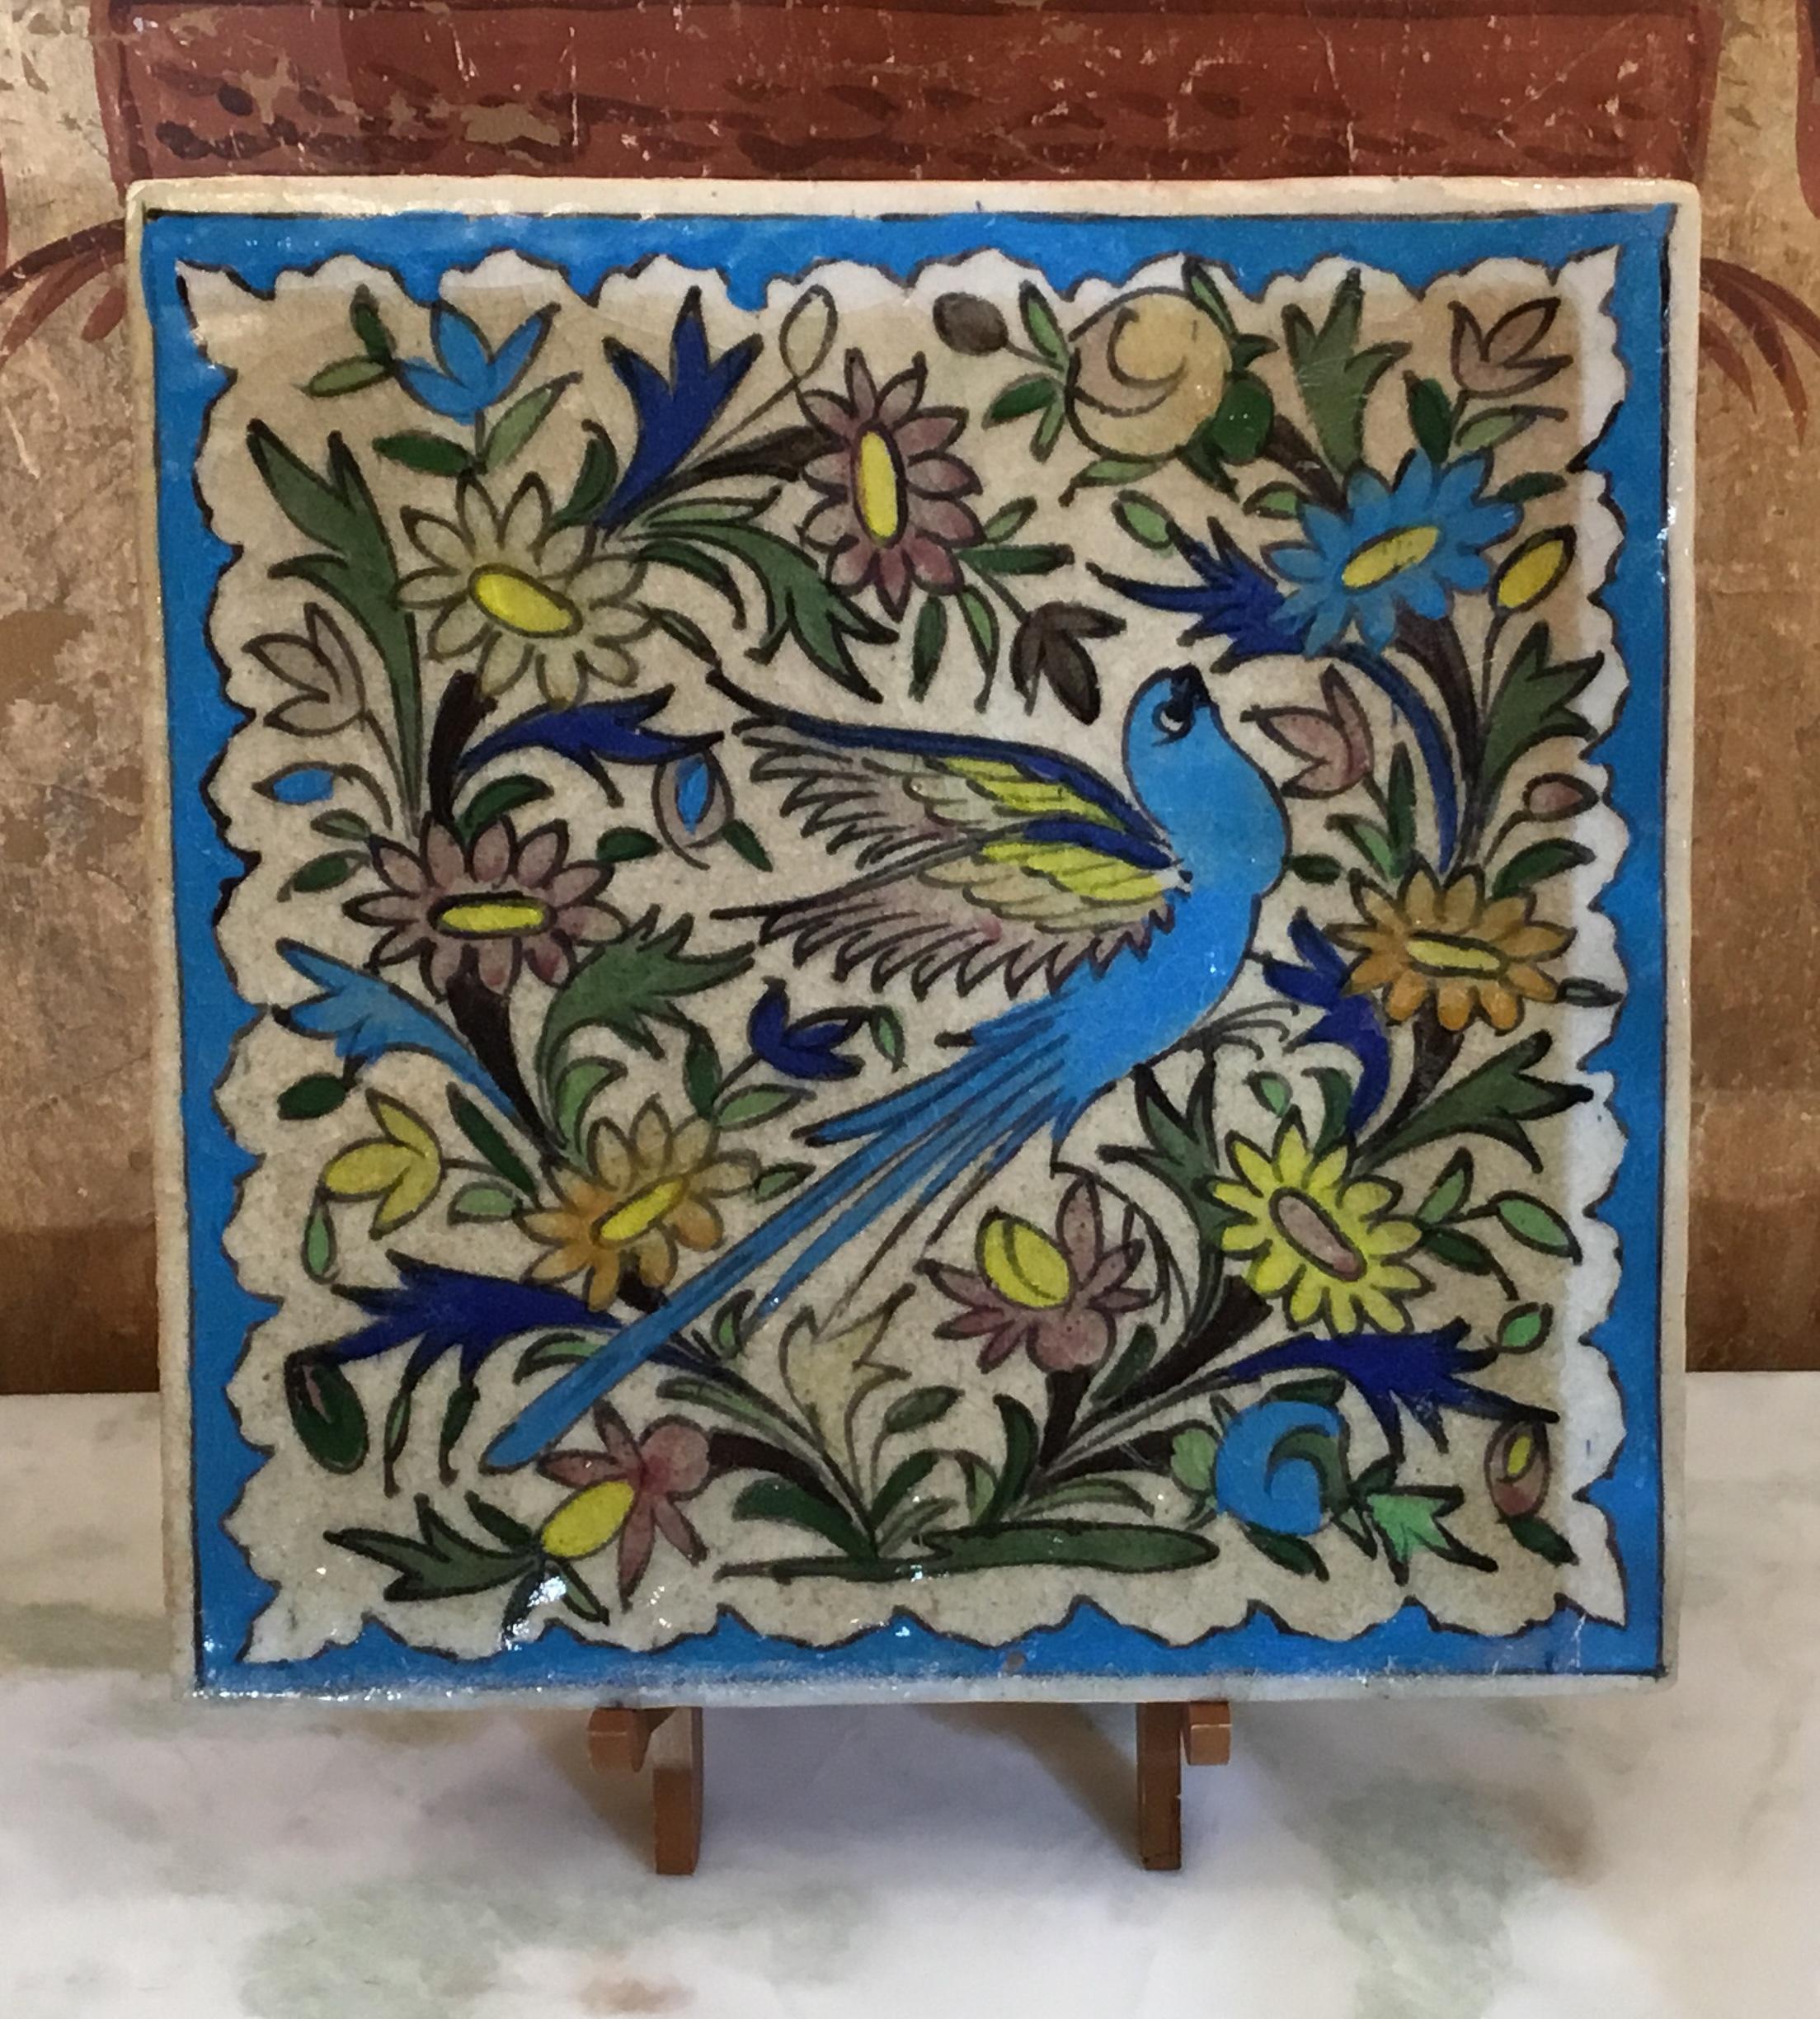 Beautiful Persian tile hand painted and glazed with exceptional painting of bird surrounds in colorful flowers and vines scenery.
The tile can hang on the wall, or display on a wood stand. Wood stand included.
 